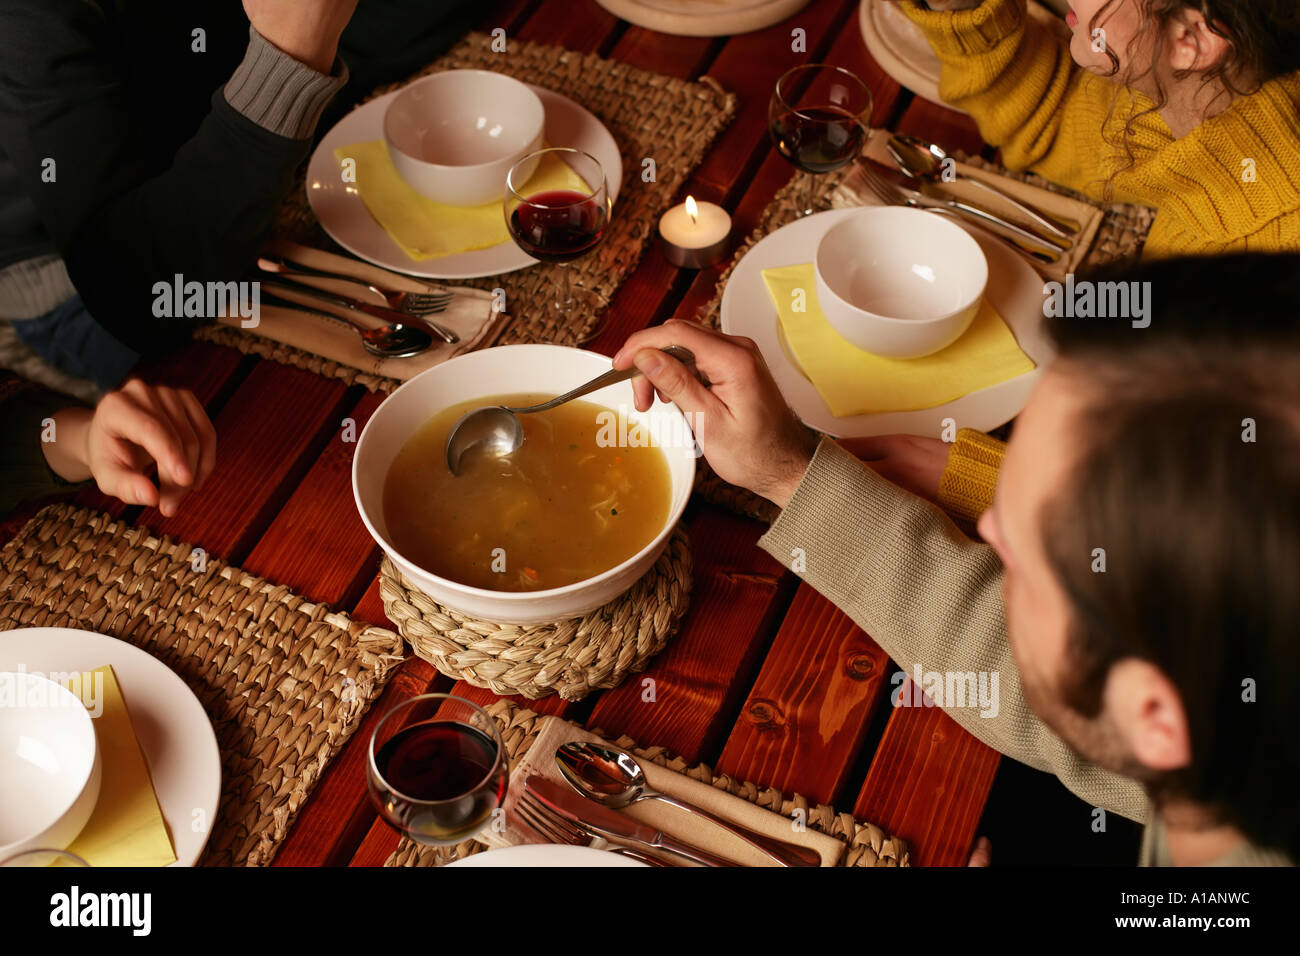 Friends about to eat soup Stock Photo